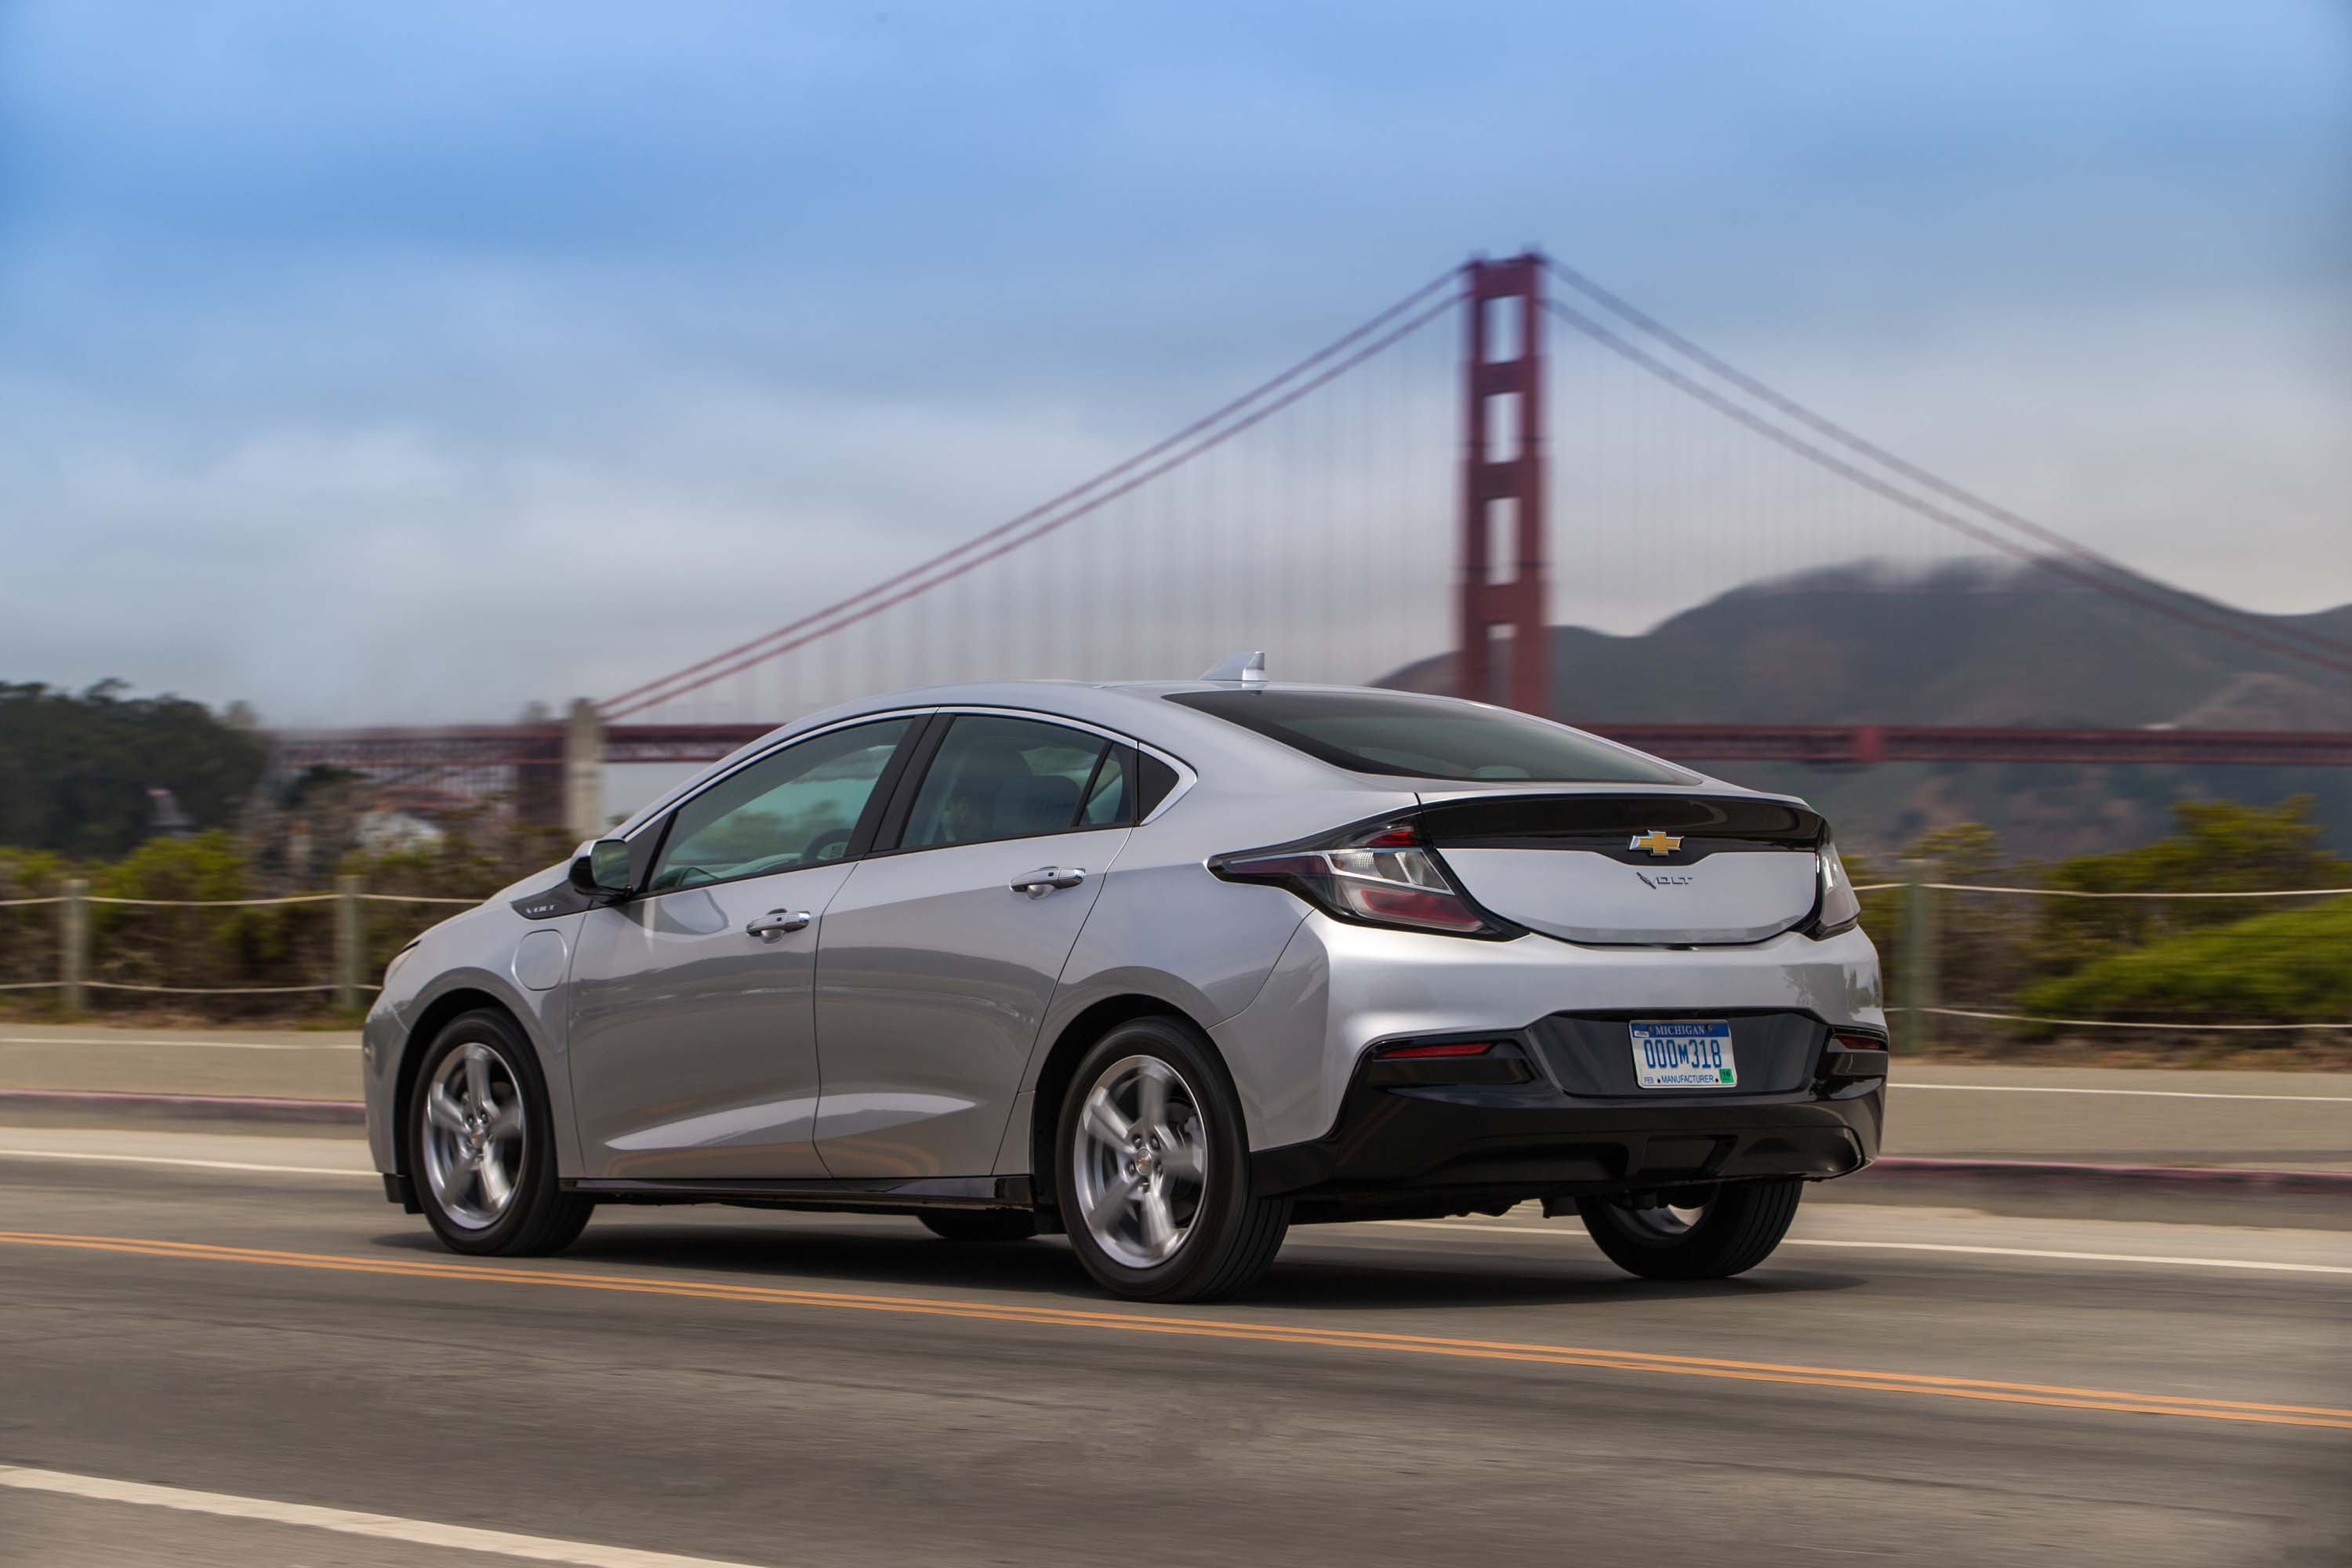 10 lessons from the short life of the Chevy Volt, 2011-2019